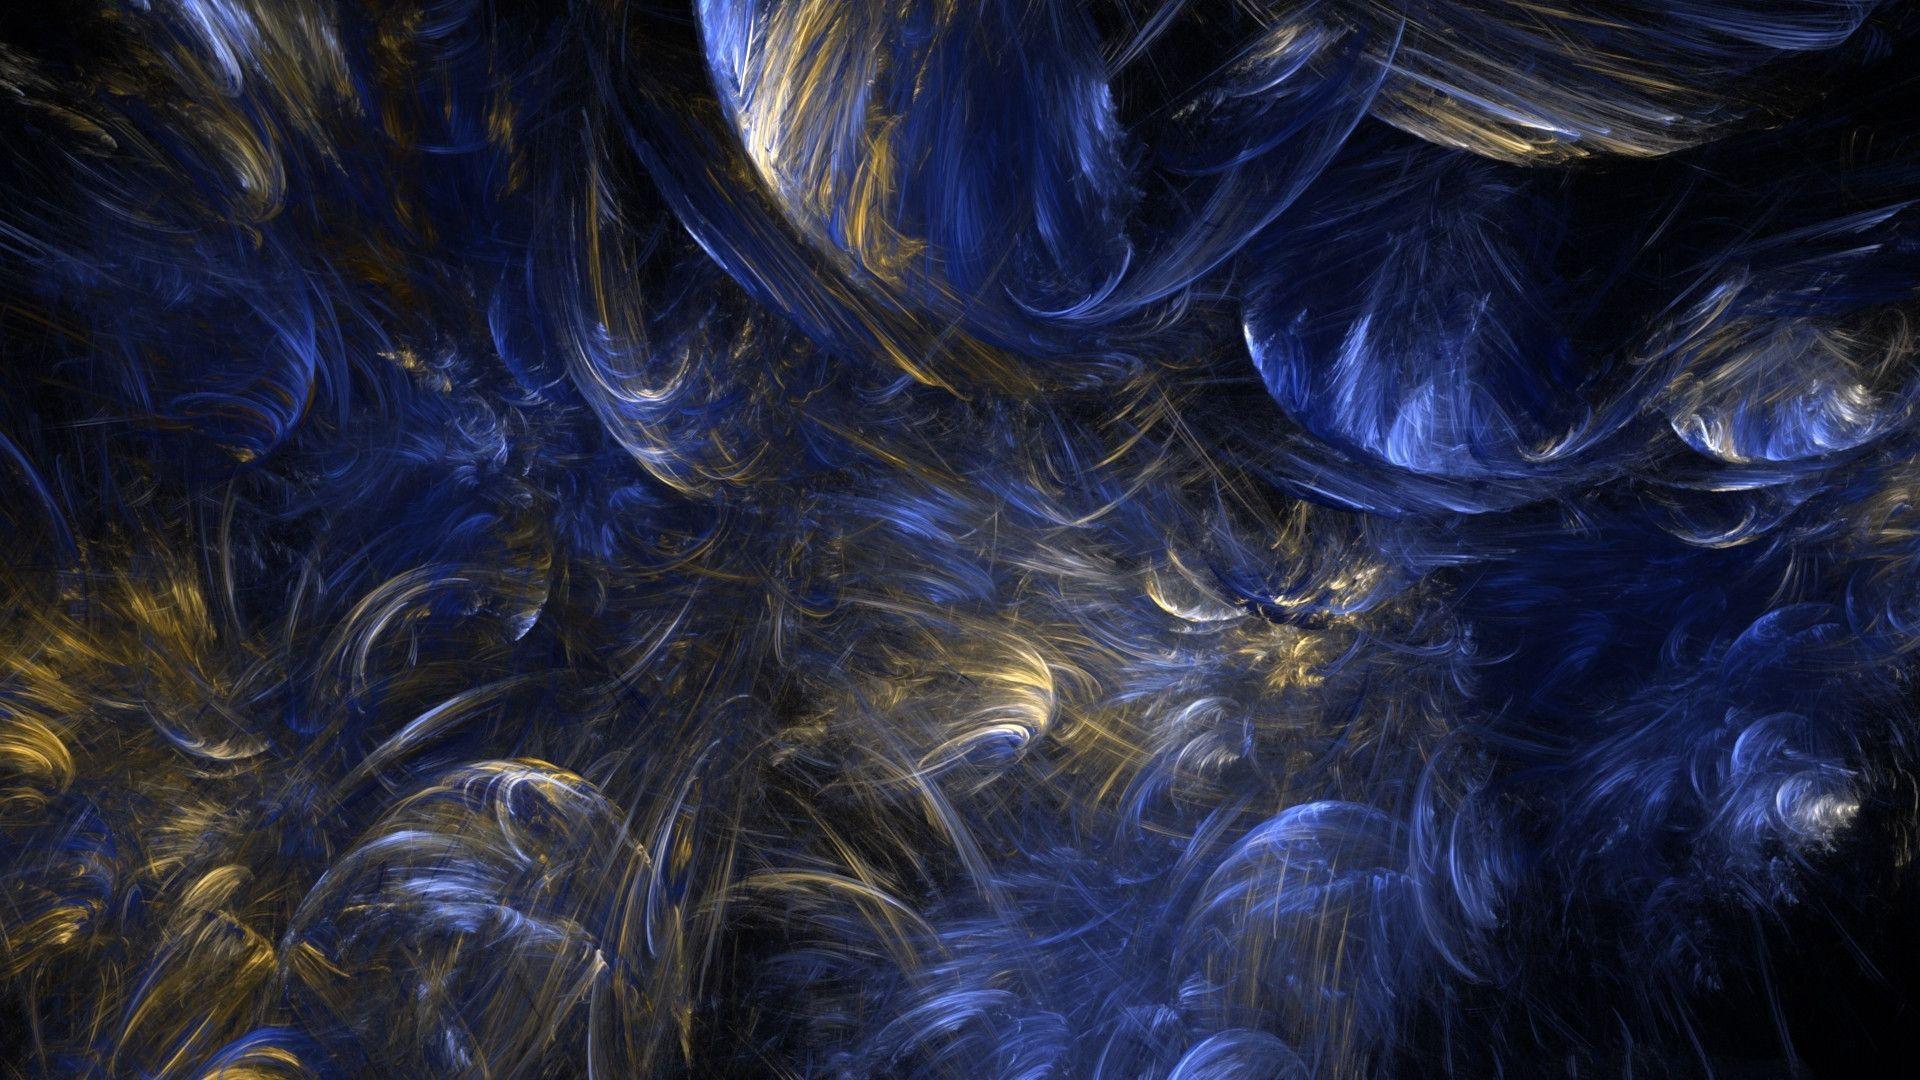 Blue and Gold Abstract Wallpapers - Top Free Blue and Gold Abstract